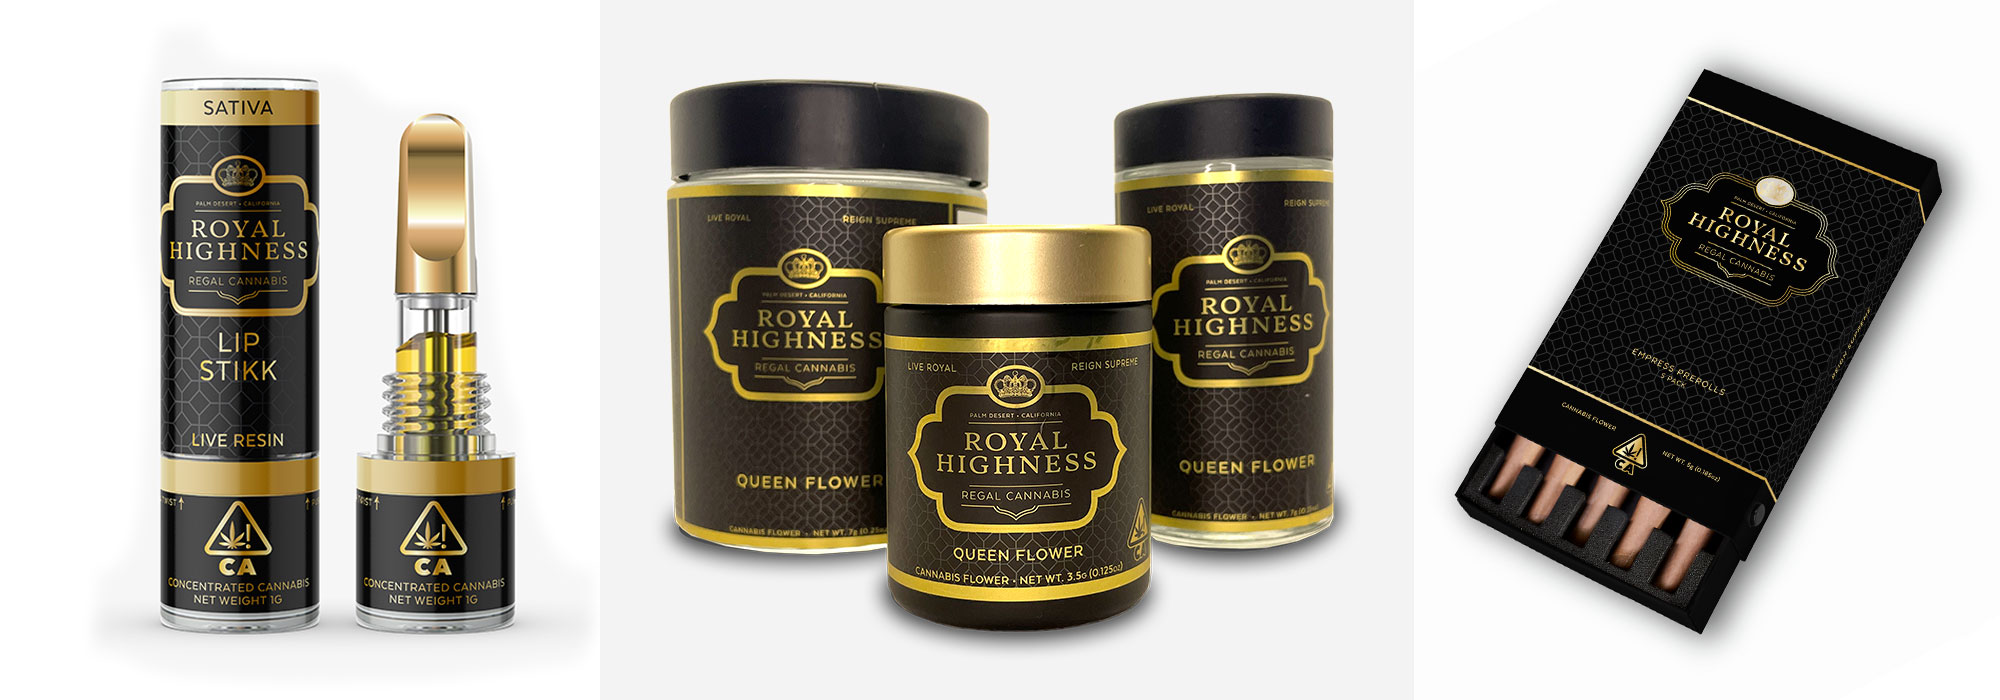 Royal Highness cannabis packaging design by anouk tapper CMA Brnad Creative